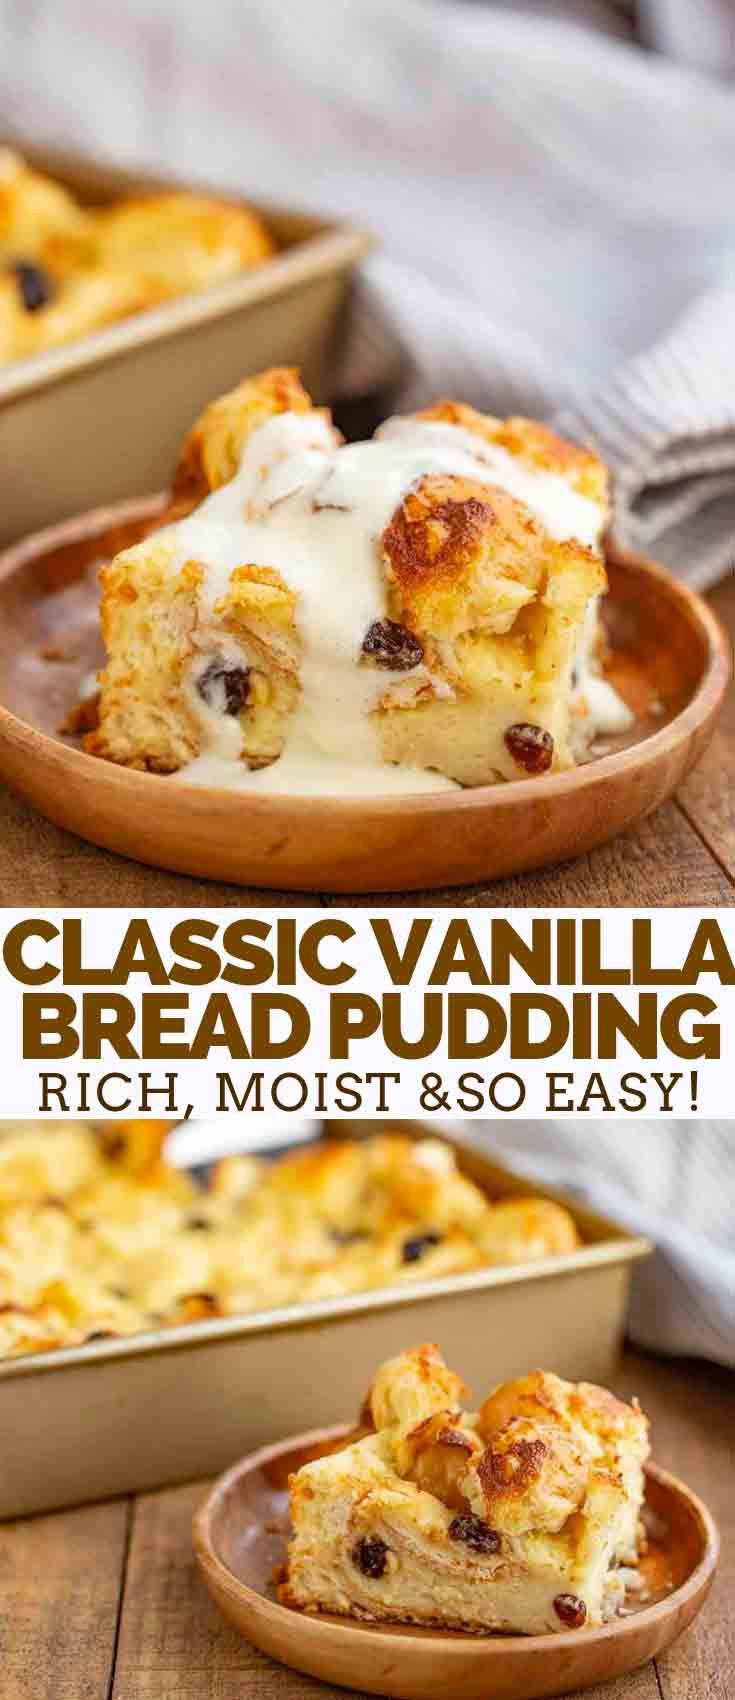 Old Fashioned Southern Bread Pudding Recipe
 Bread Pudding is the PERFECT old fashioned dessert for the